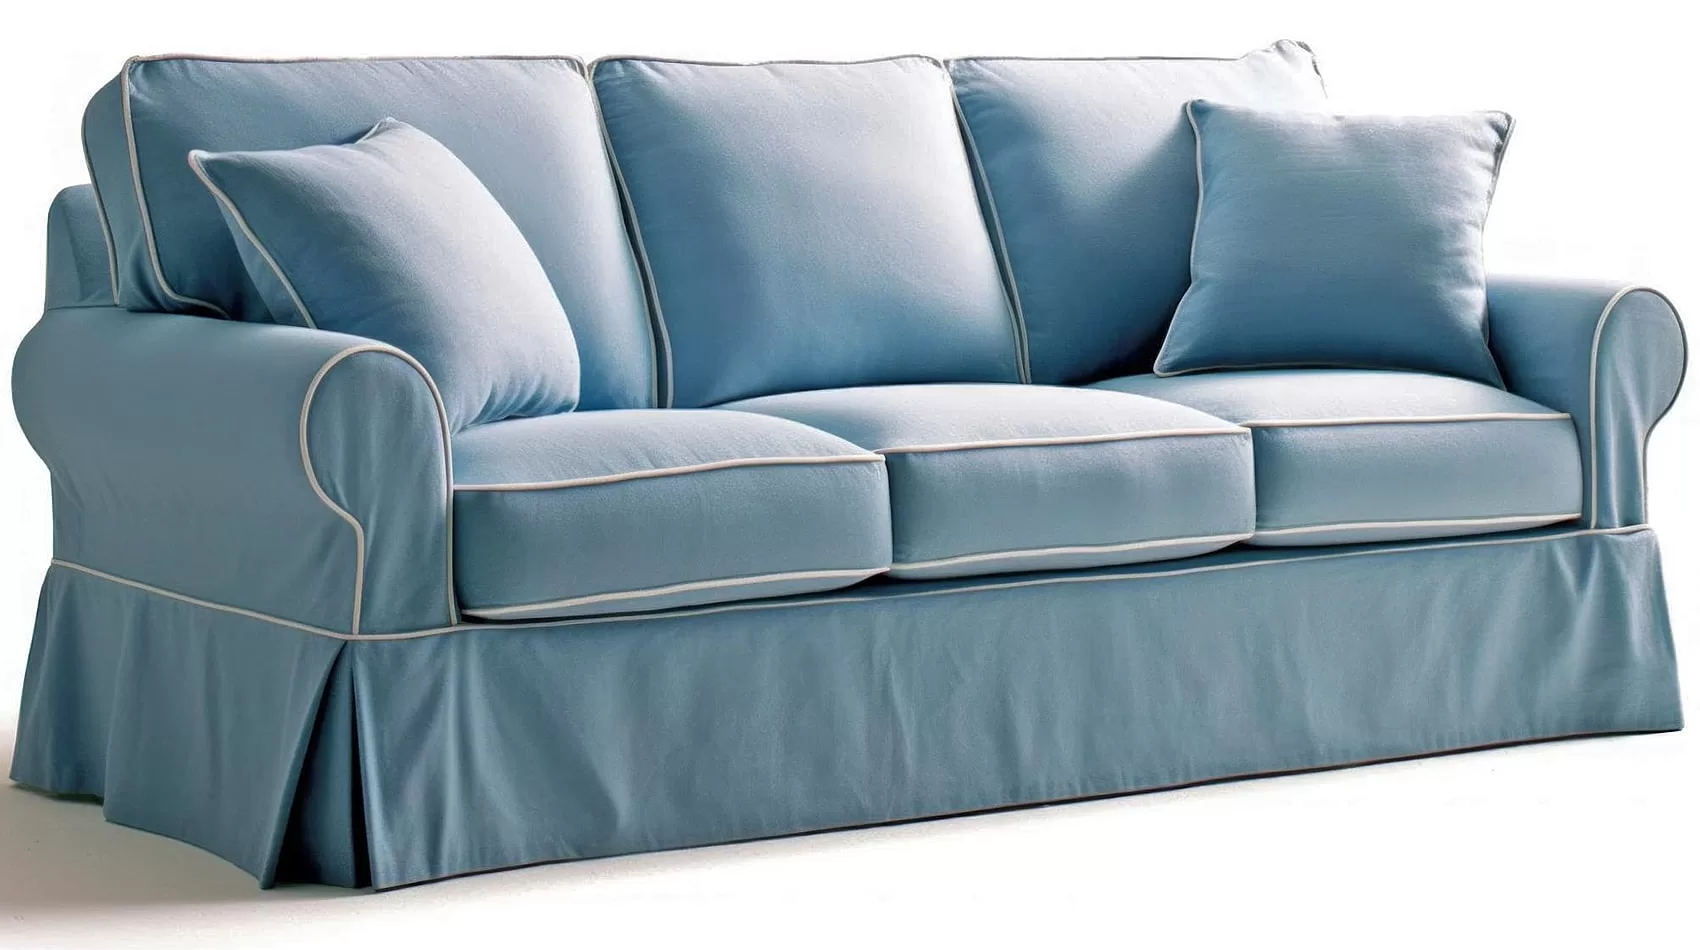 Slipcovers | Couch Cushion Slipcovers